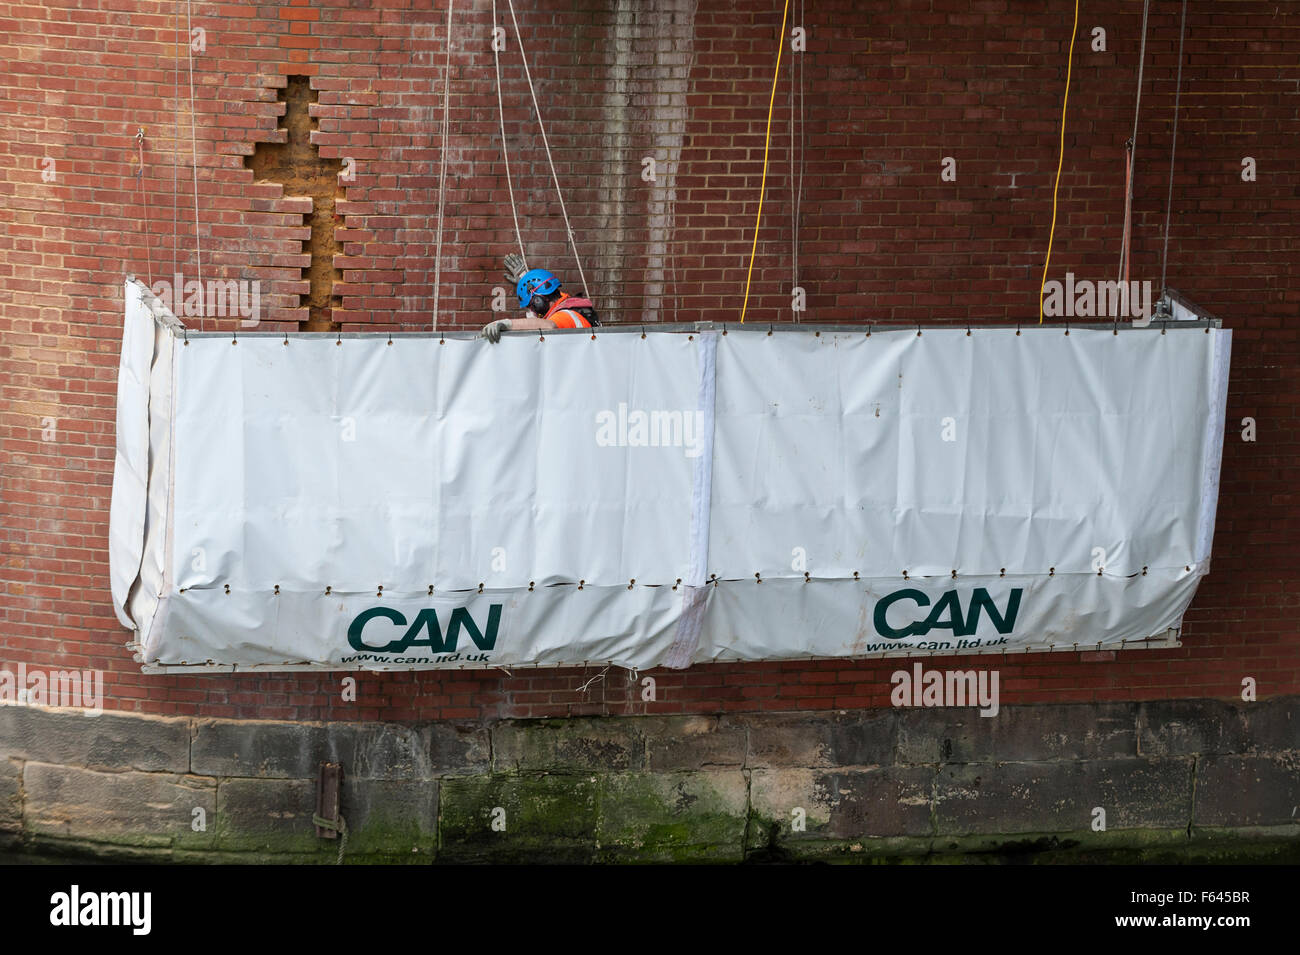 London, UK. 11 November 2015.  Construction workers at work on one of the exposed brick supports under Hungerford Bridge.  They are standing on a specially suspended platform with the River Thames a few feet below them and train tracks into Charing Cross railway station above them. Credit:  Stephen Chung / Alamy Live News Stock Photo